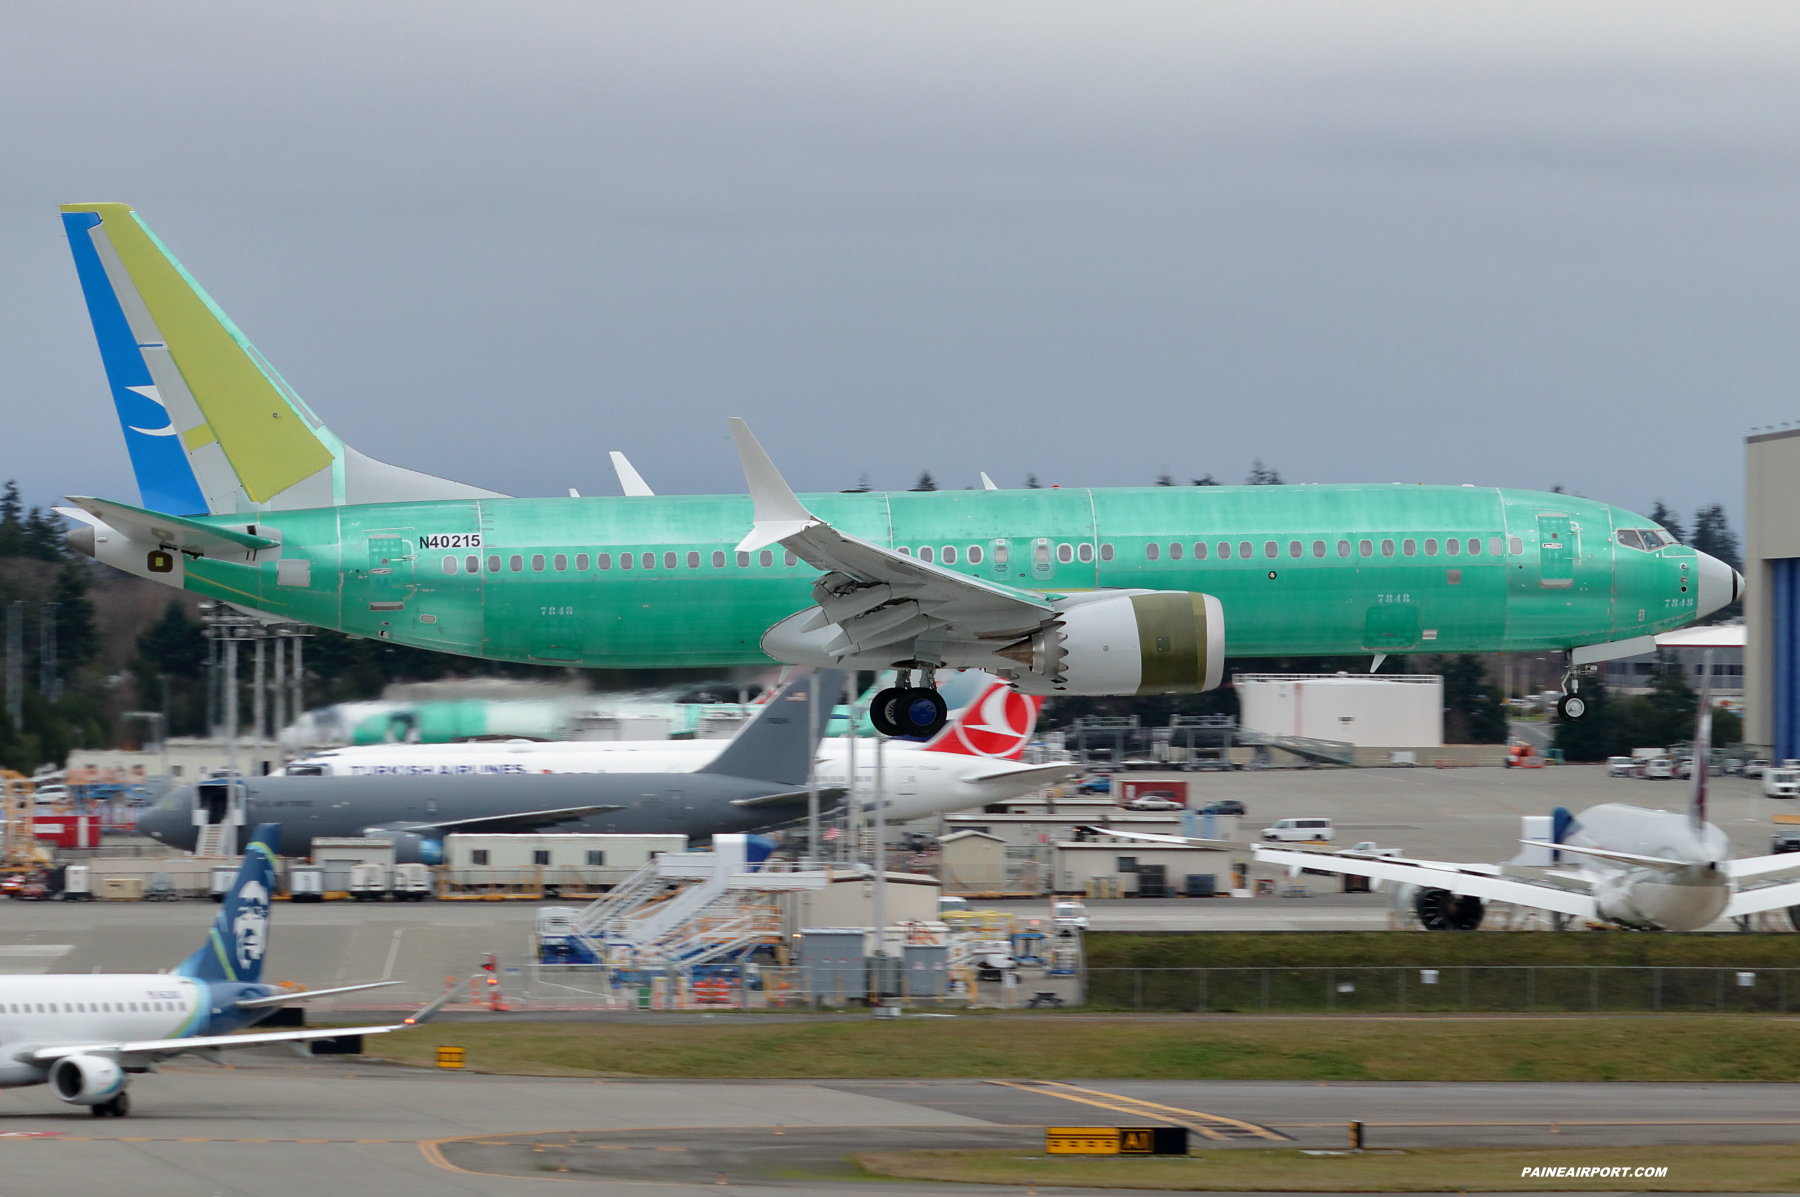 737 N40215 at Paine Field